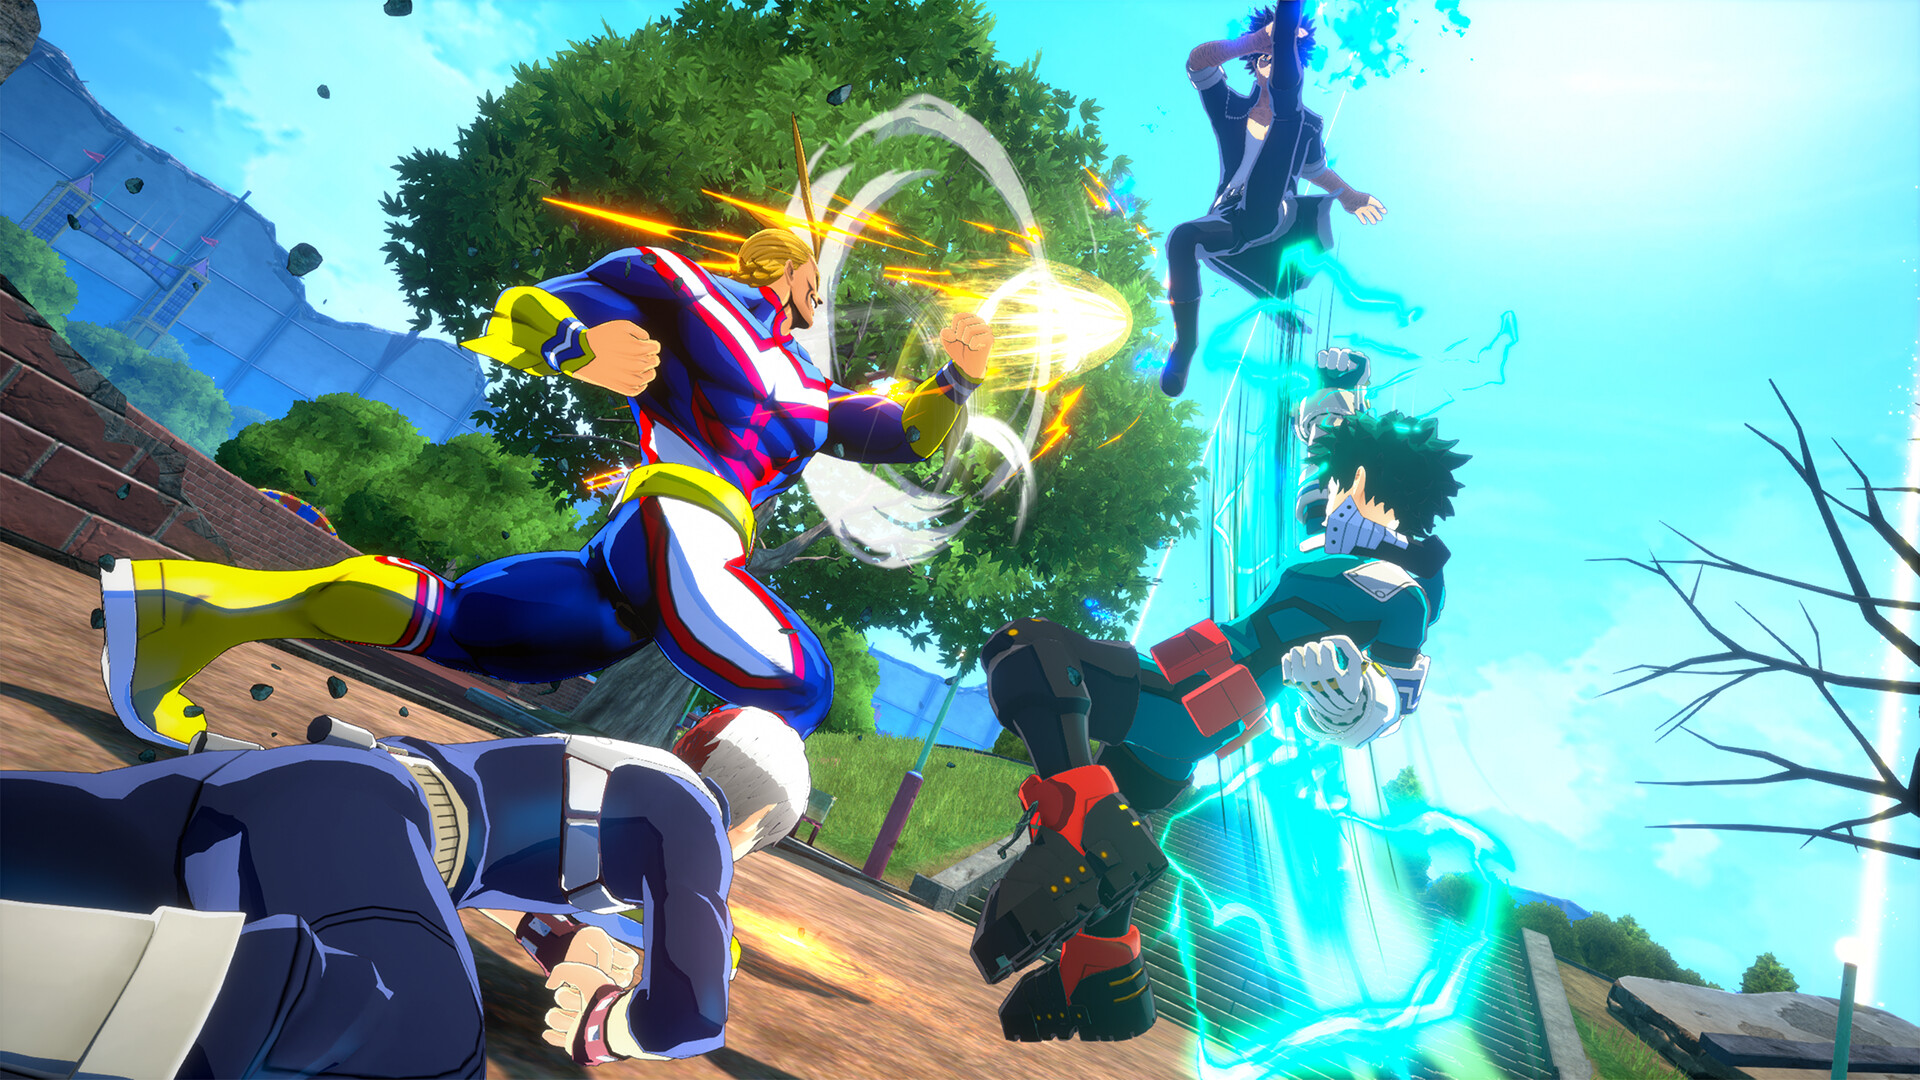 Free-To-Play Battle Royale, My Hero Academia: Ultra Rumble